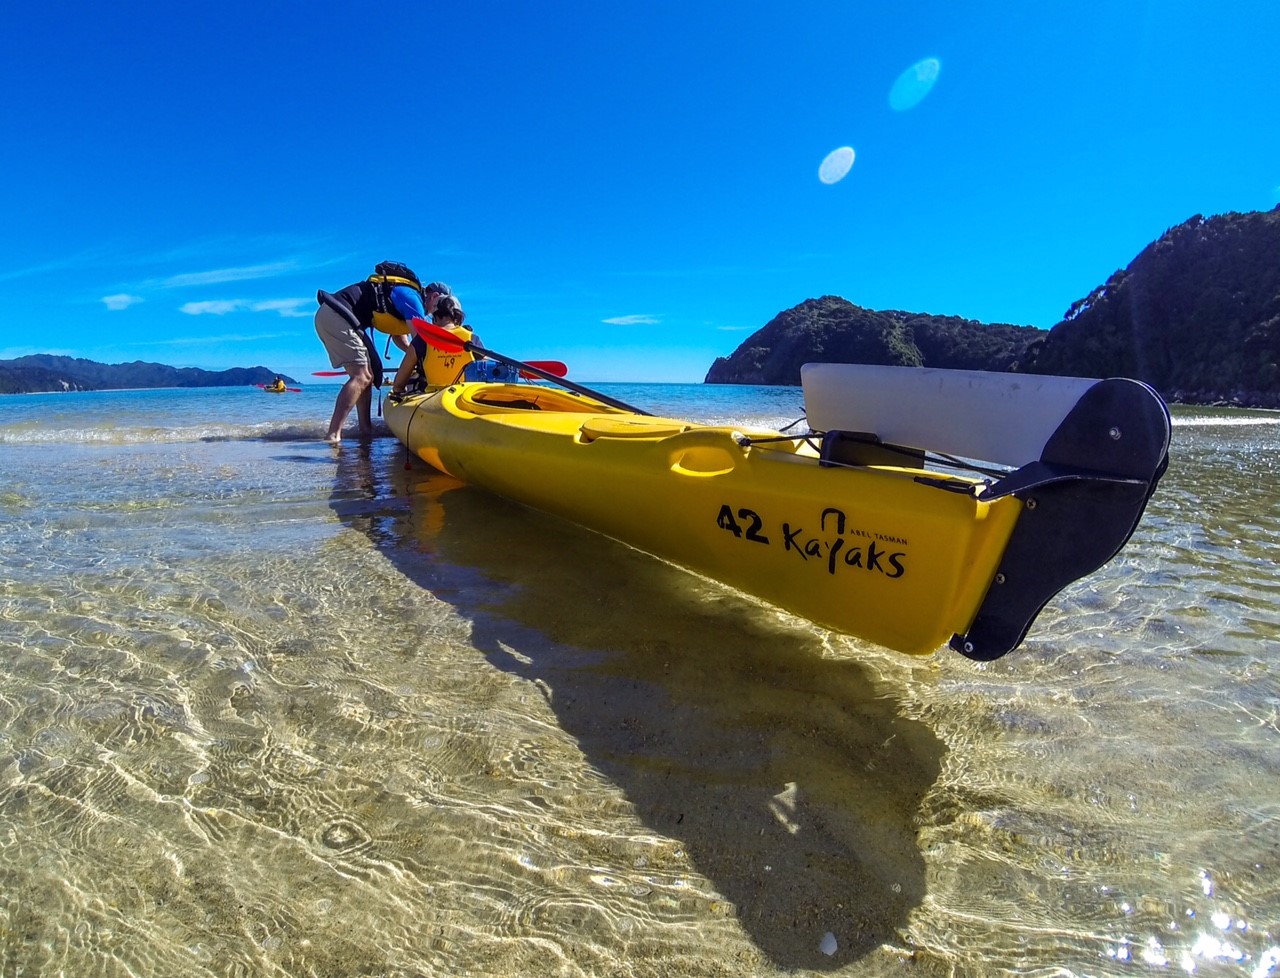 Taste The Two - 6 days / 5 nights Independent Cycling Tour with a 2 day guided, Kayak adventure